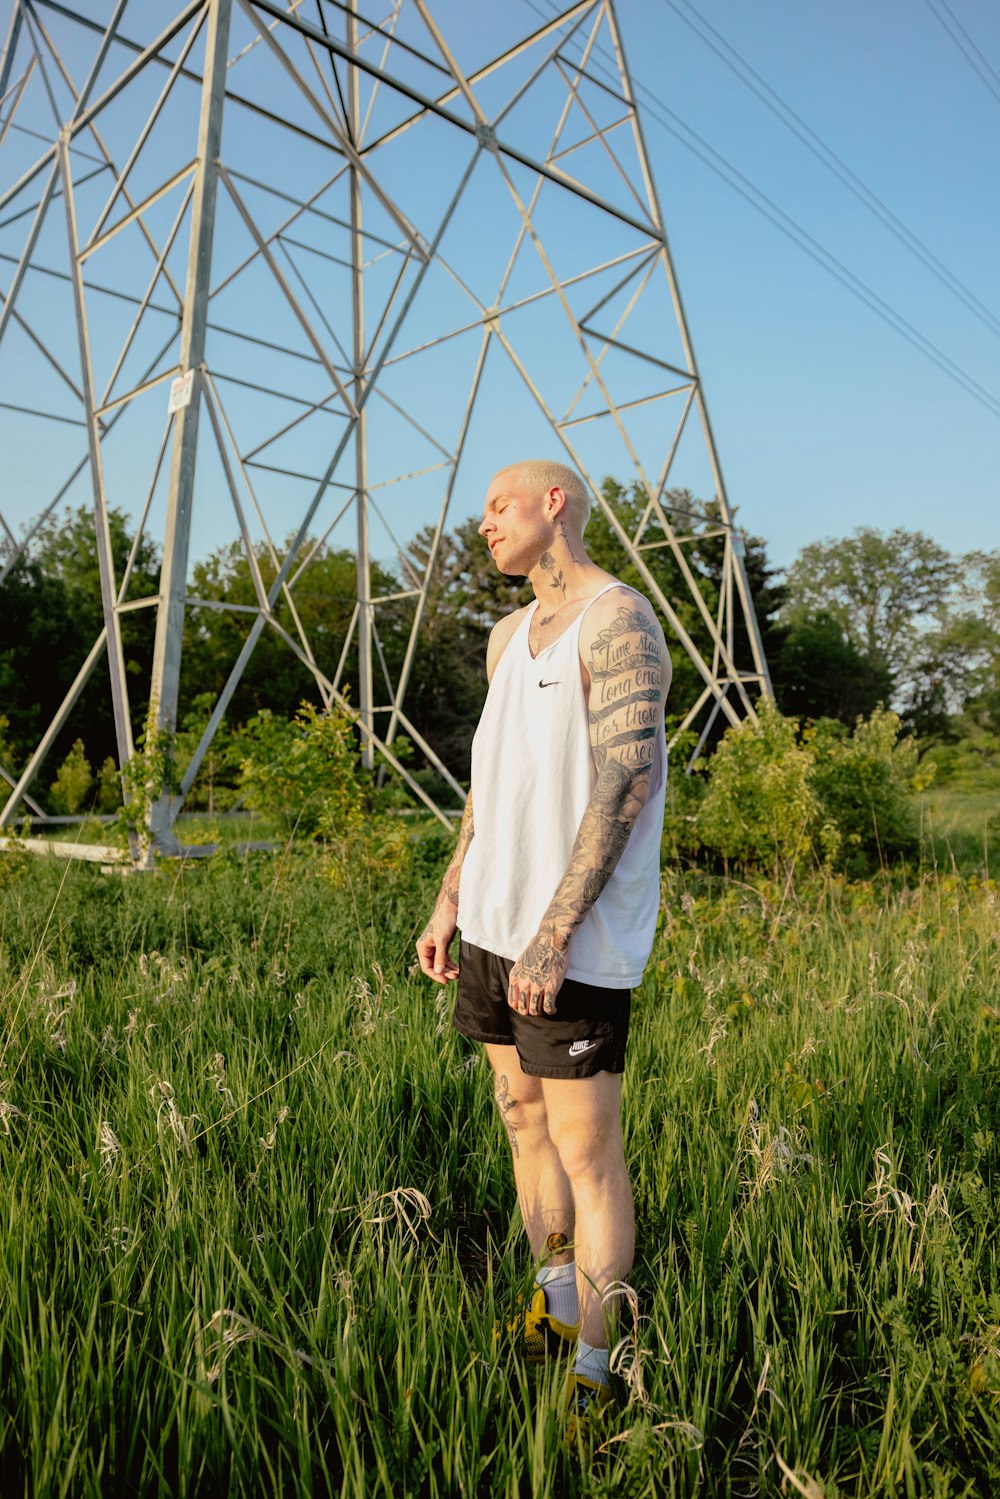 a man with tattoos standing in tall grass